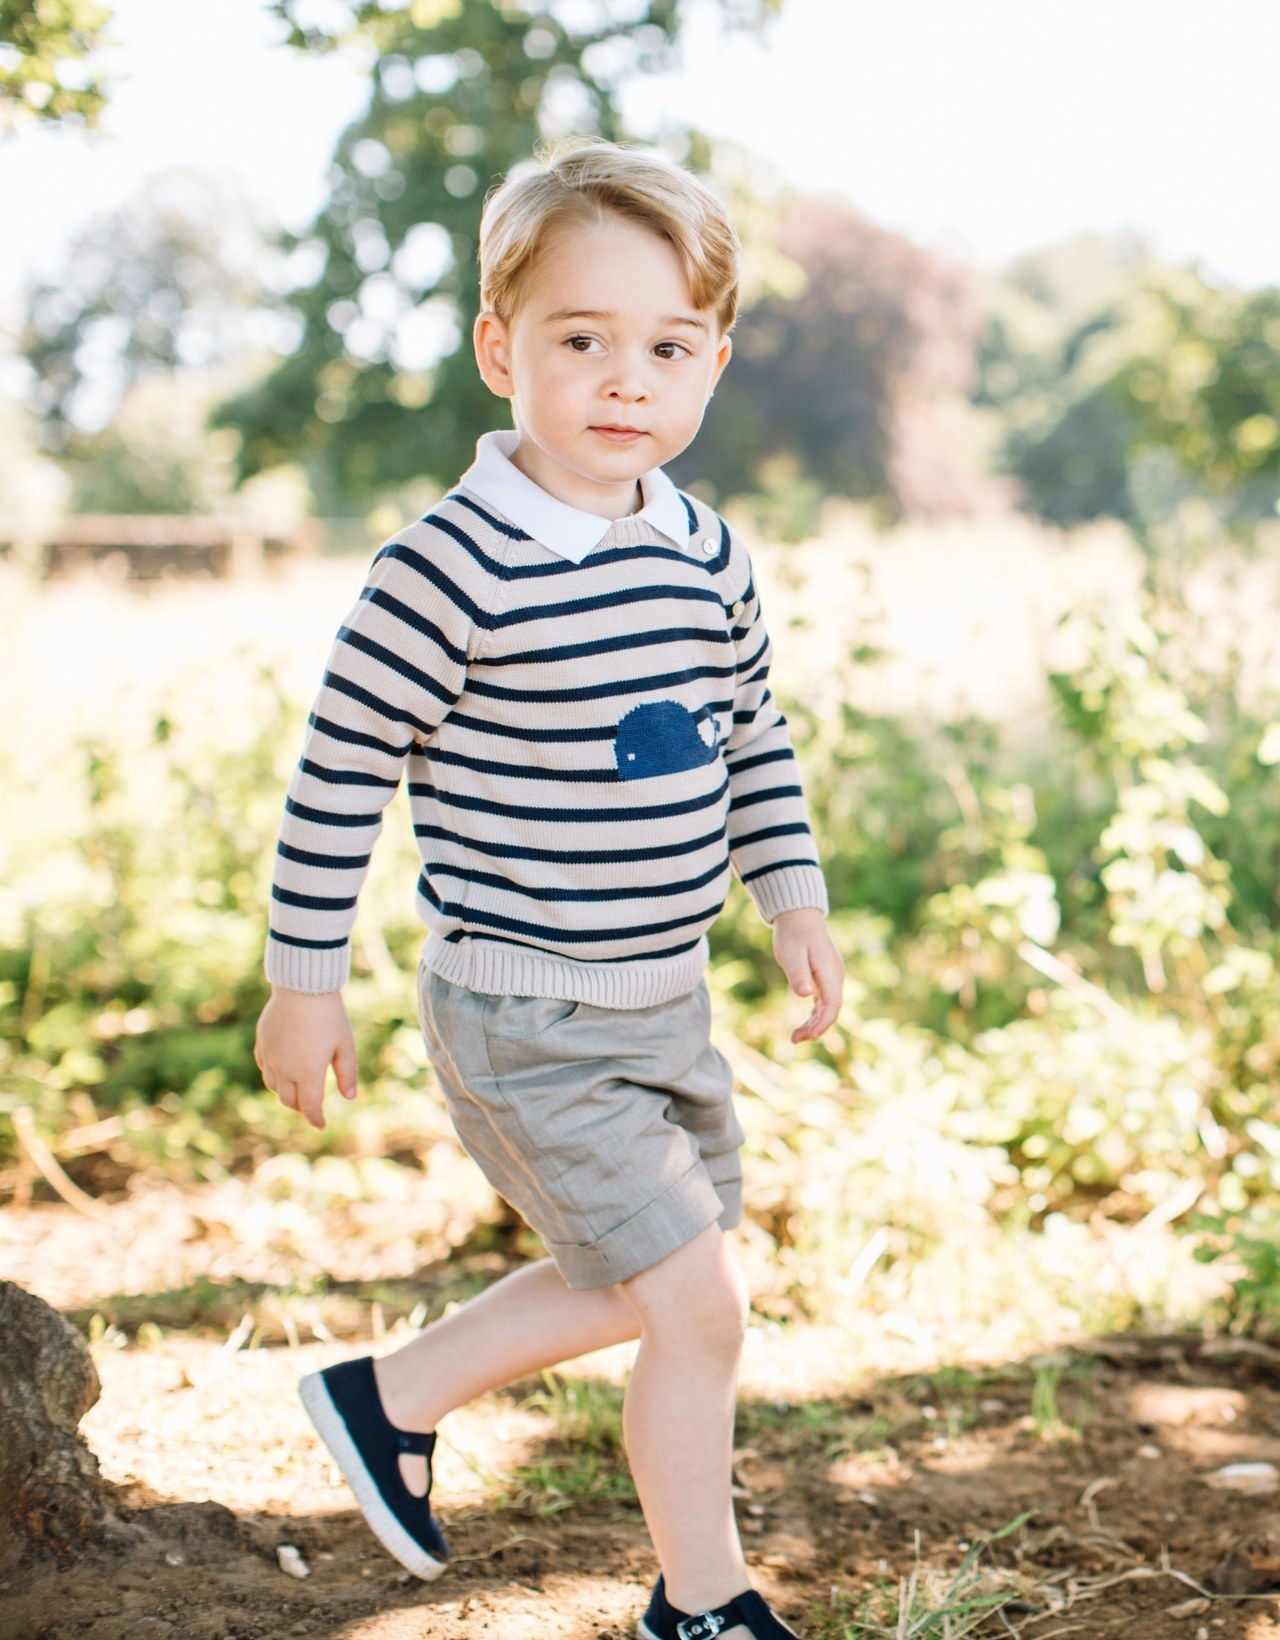 Udgivet by the Duke and Duchess of Cambridge of Prince George, who celebrates his third birthday today. The picture was taken at the family's Norfolk home in mid-July